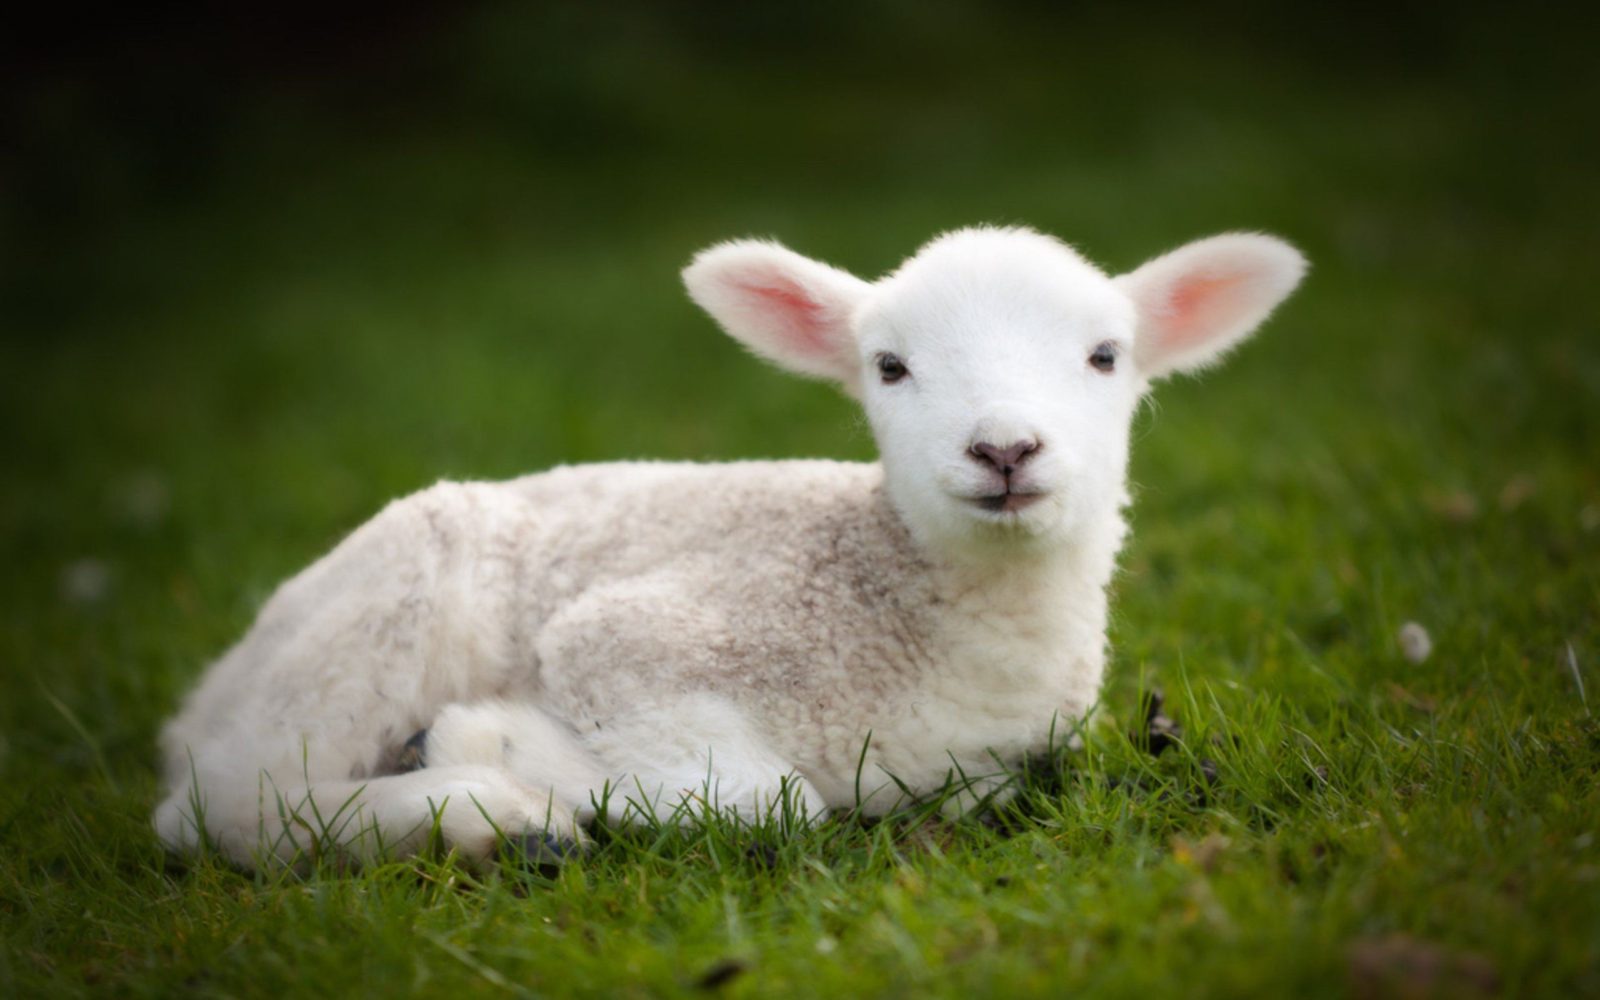 Baby sheep with wool coat